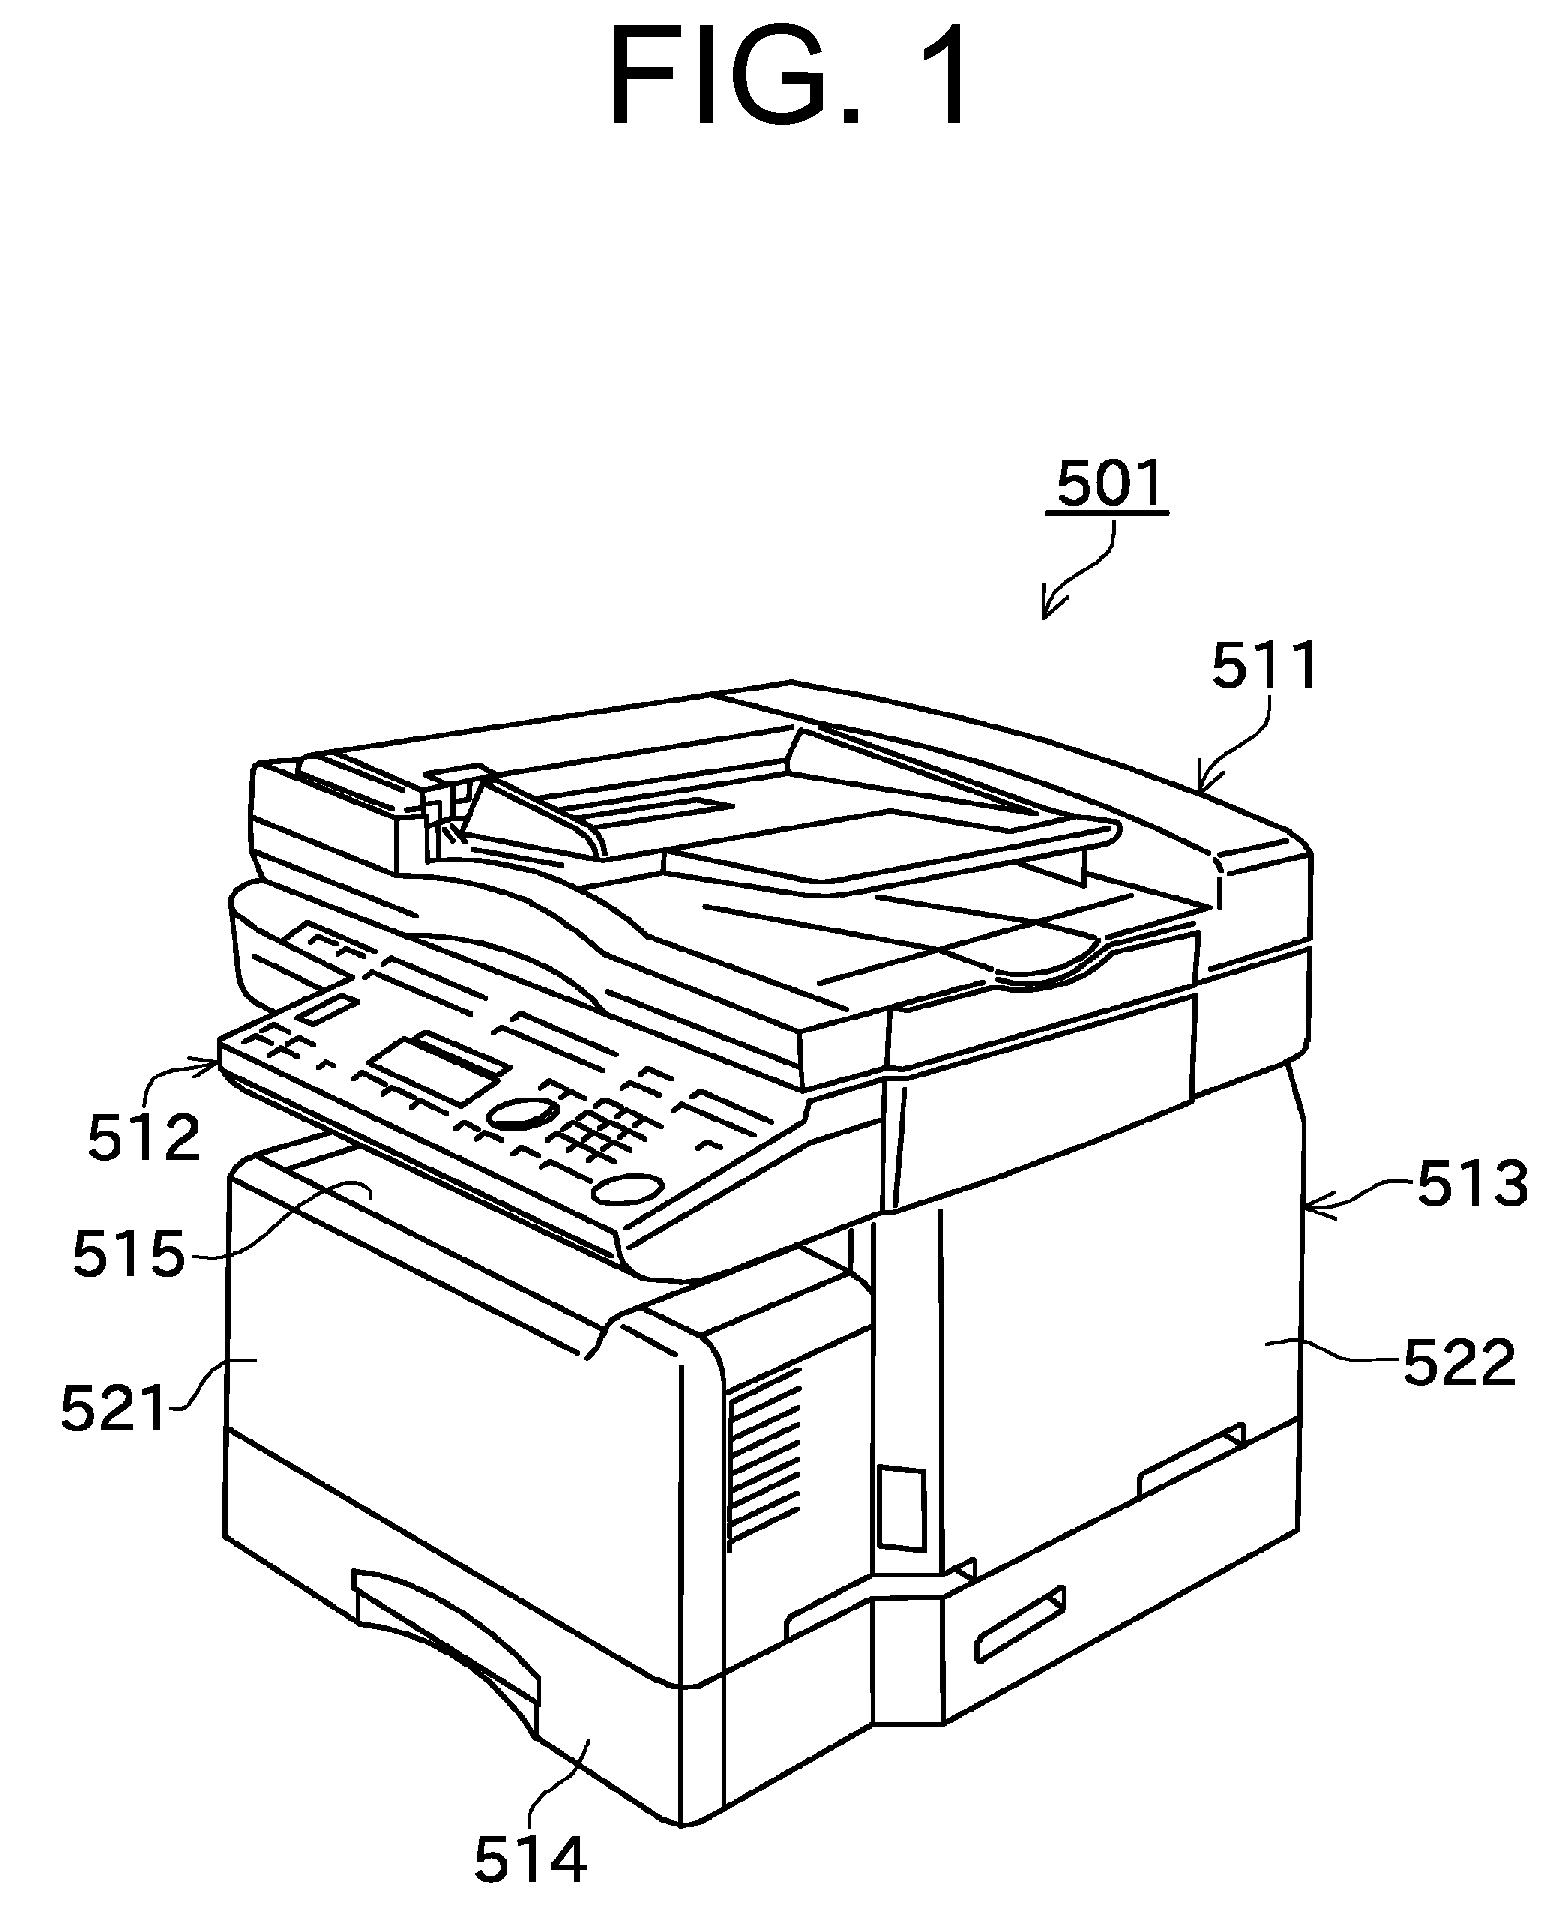 Image forming device and method of manufacturing the same